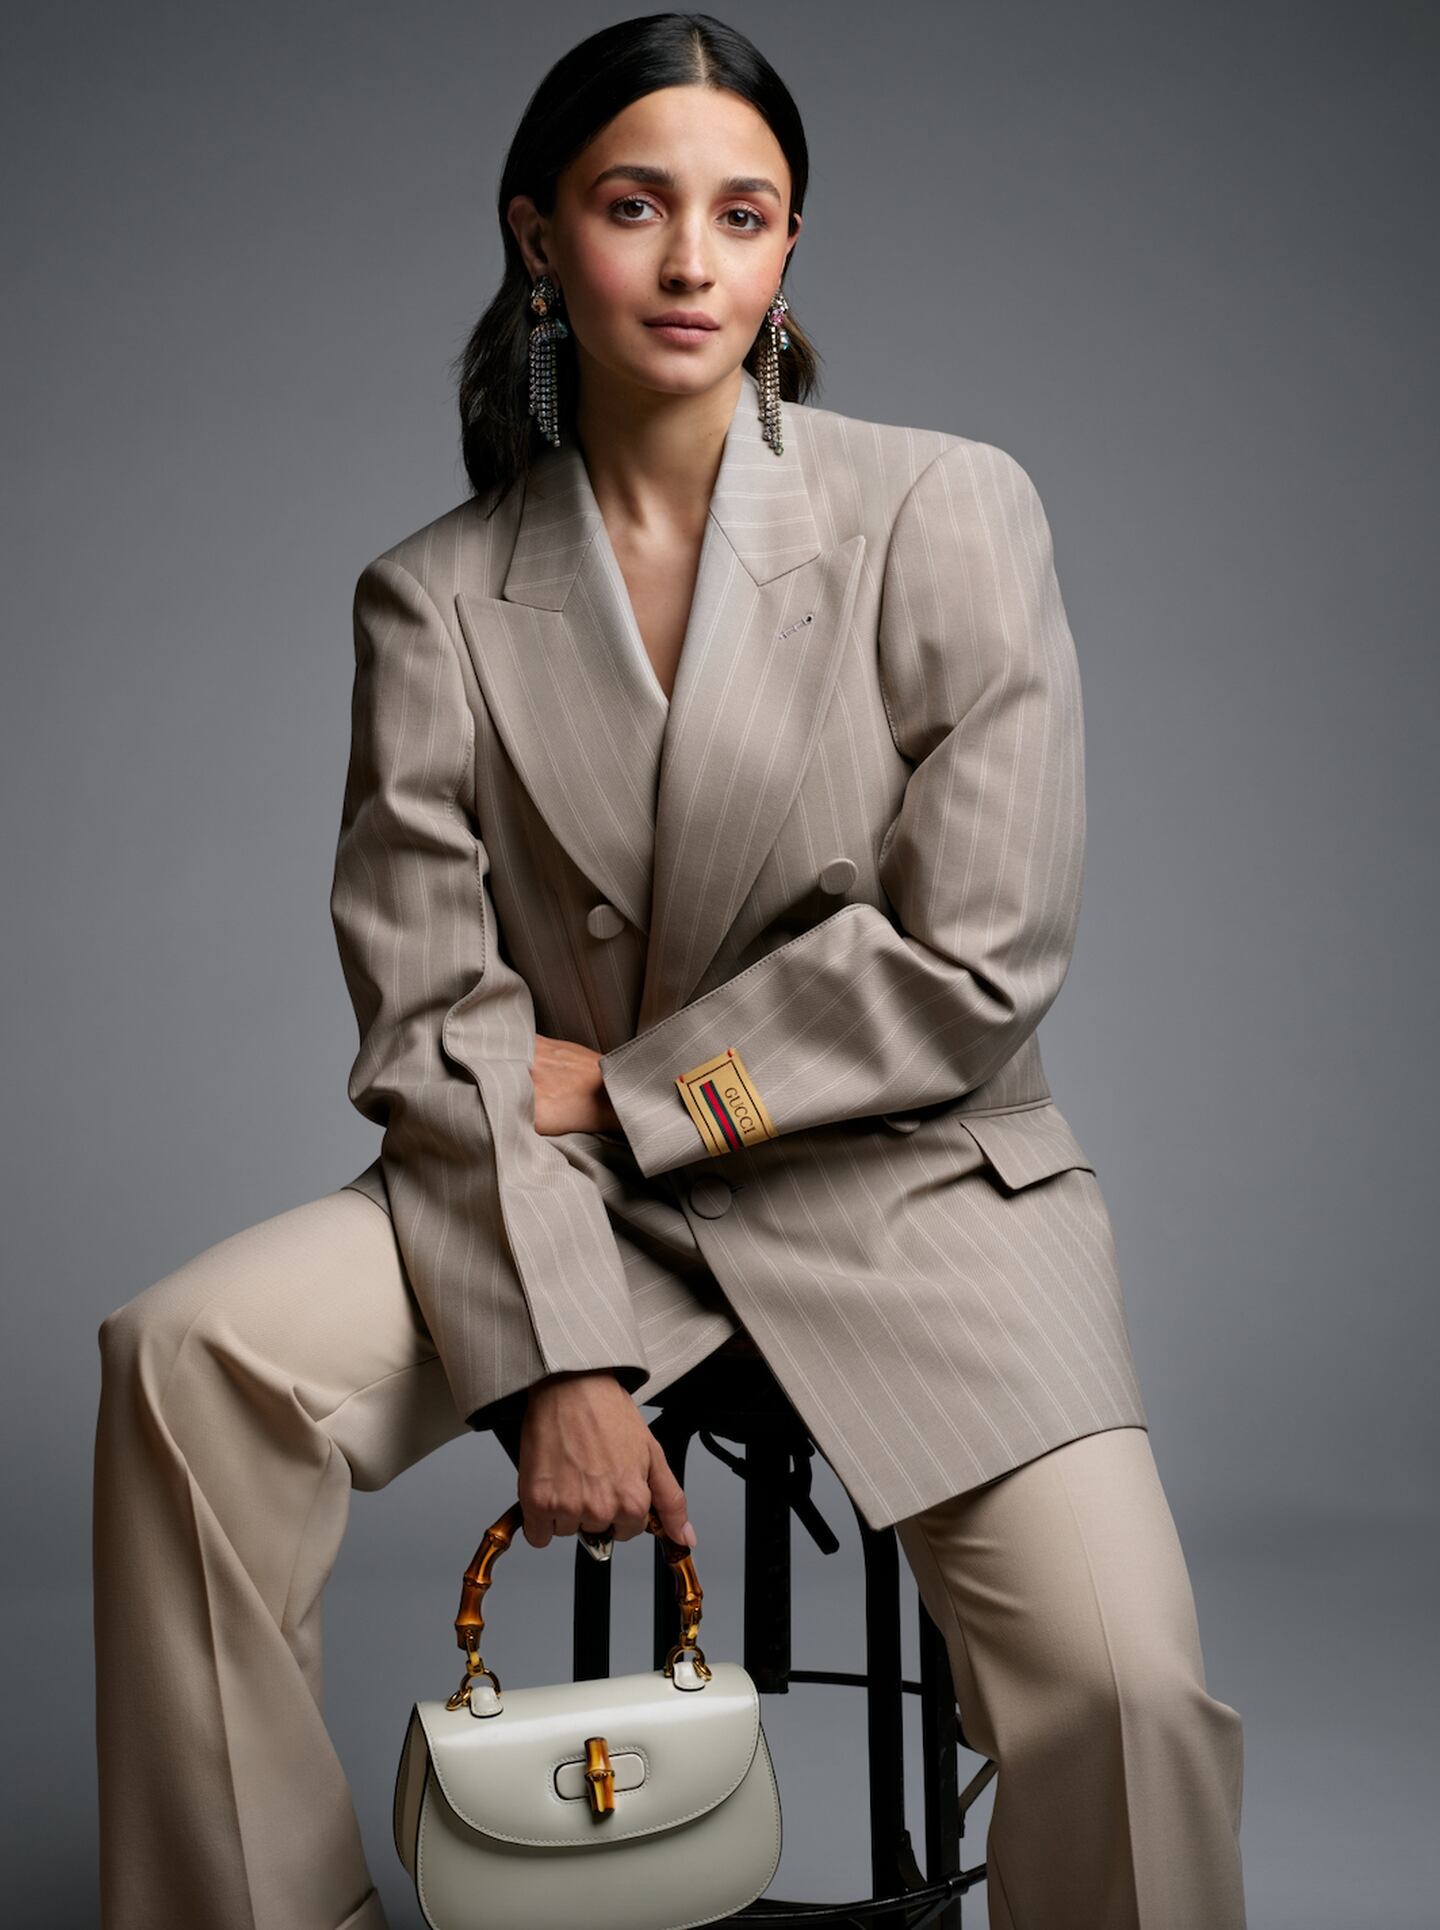 Bollywood actress Alia Bhatt became Gucci's first Indian global ambassador in 2023 pictured in a campaign shot by Mark Seliger.